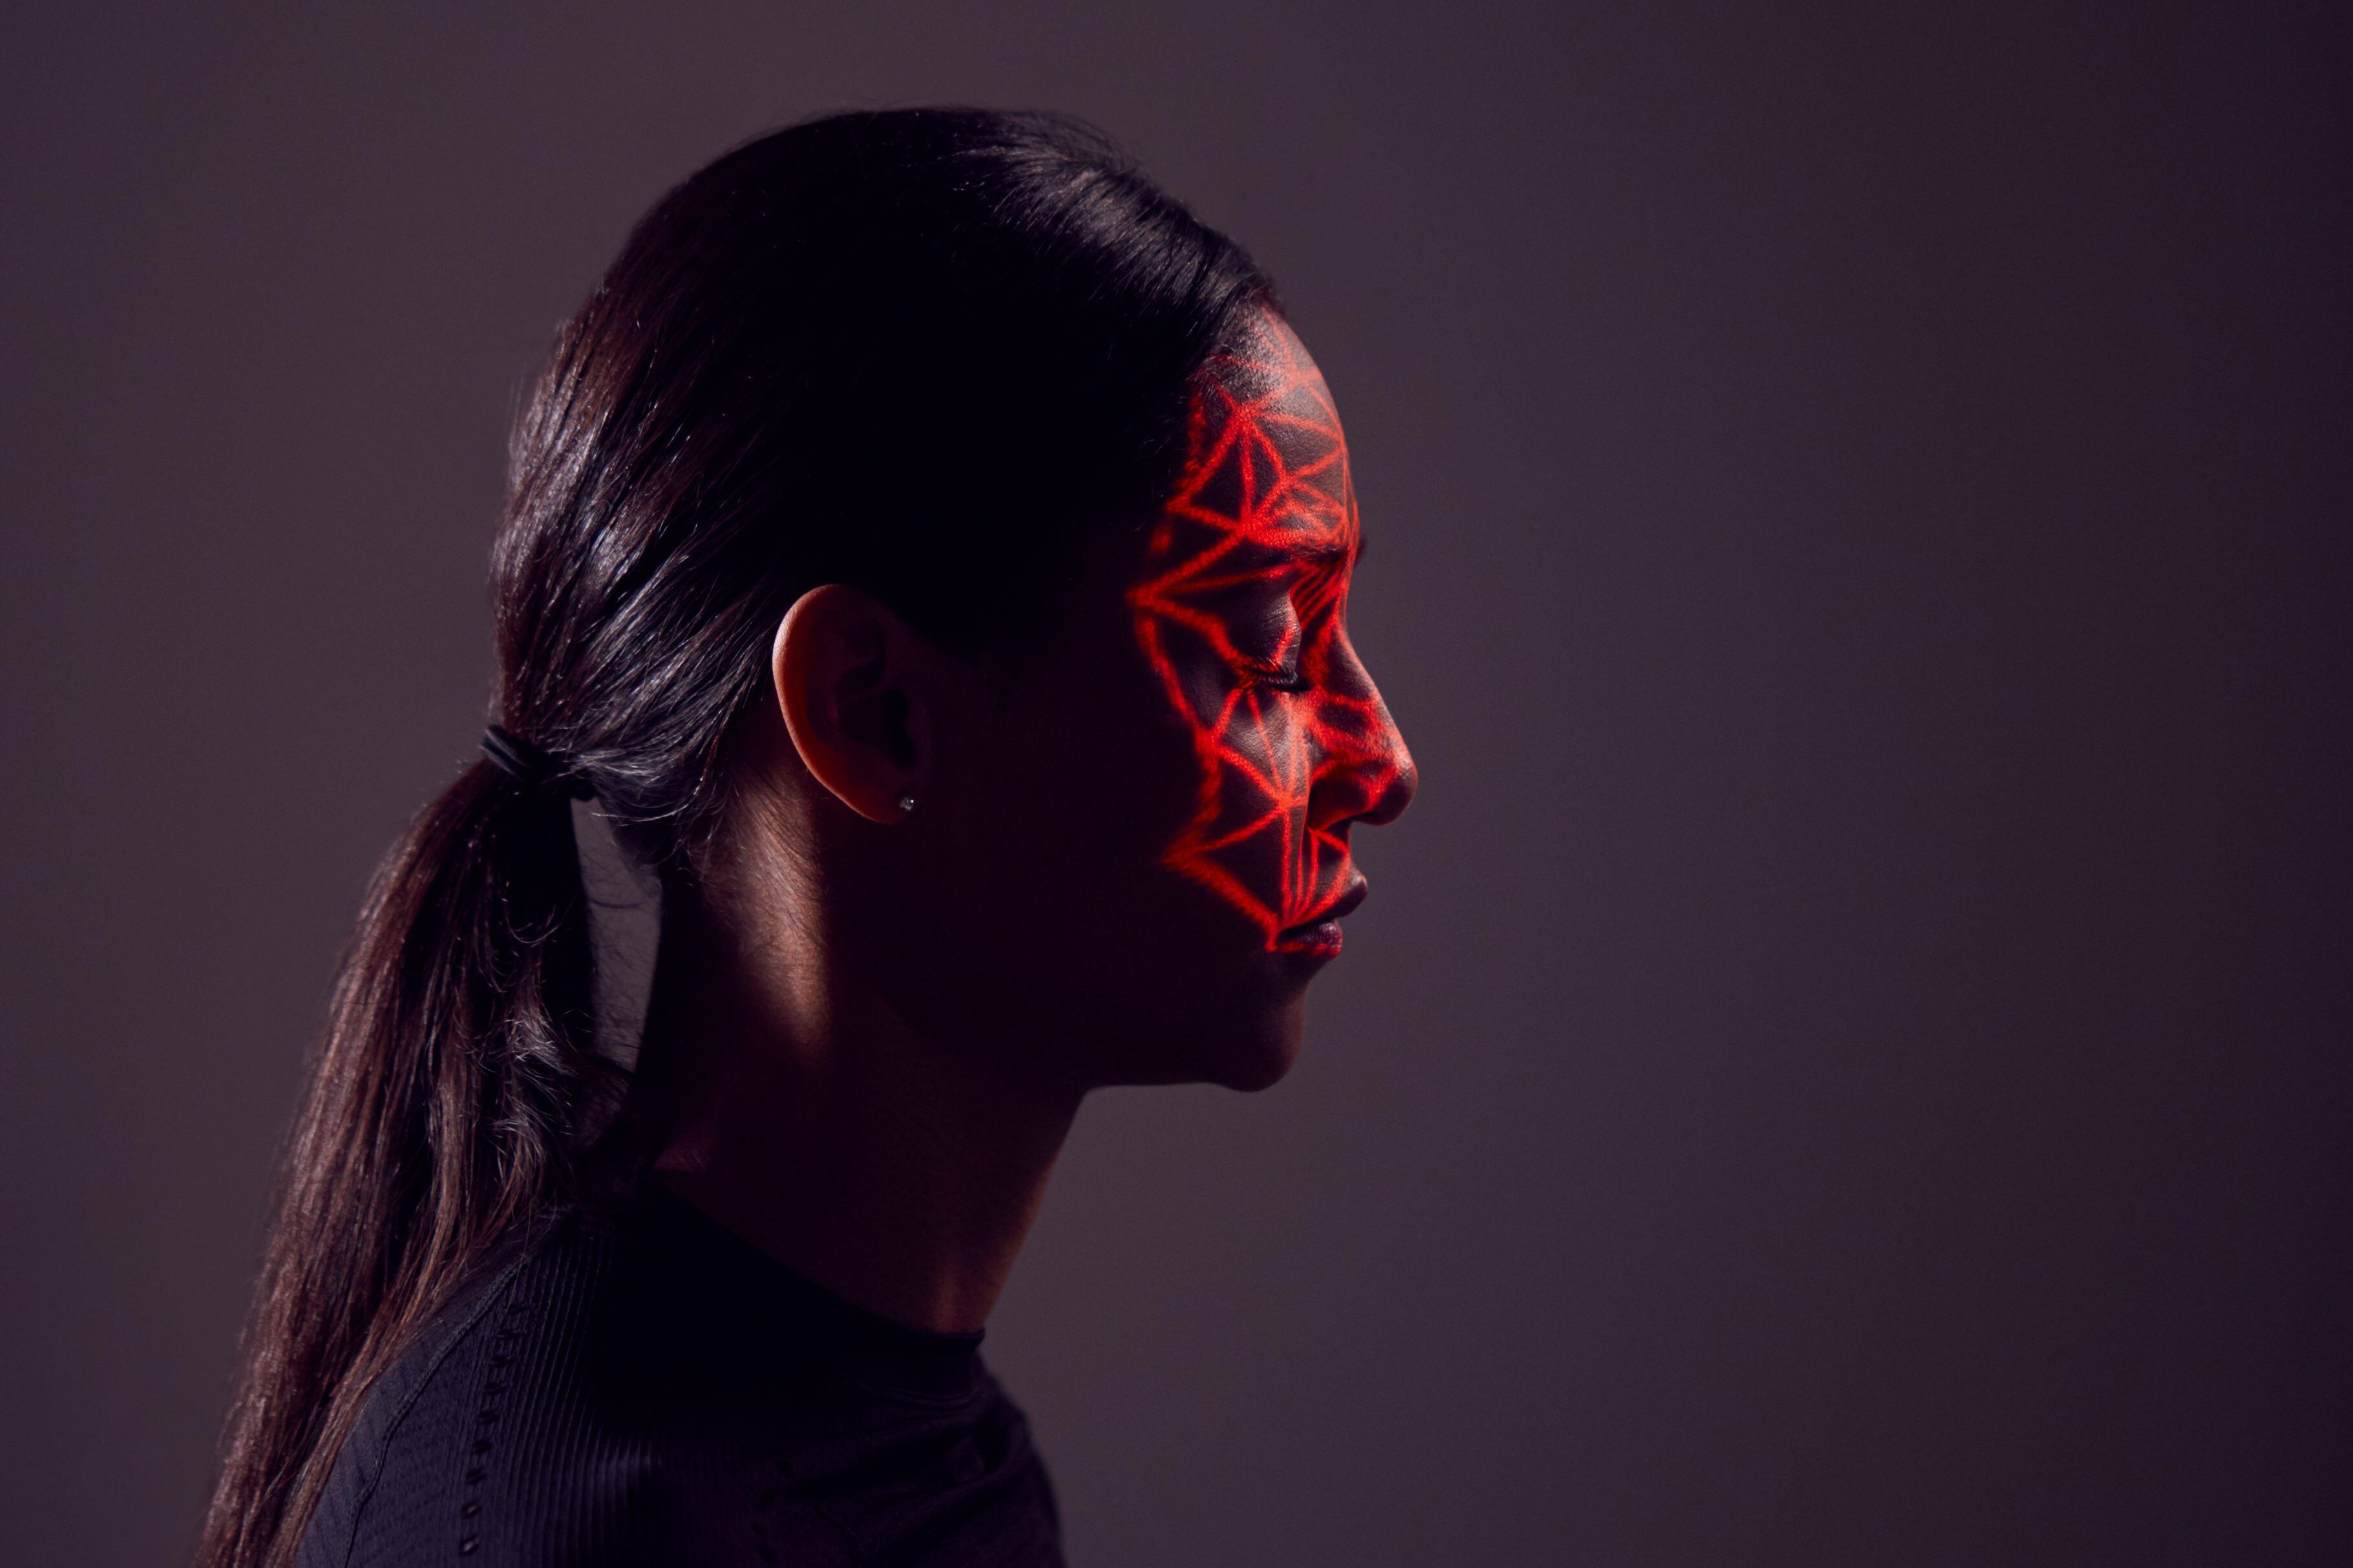 A woman with a black top and hair in a ponytail faces sideways. Her eyes are closed and a red light casts a web-like light on her face.